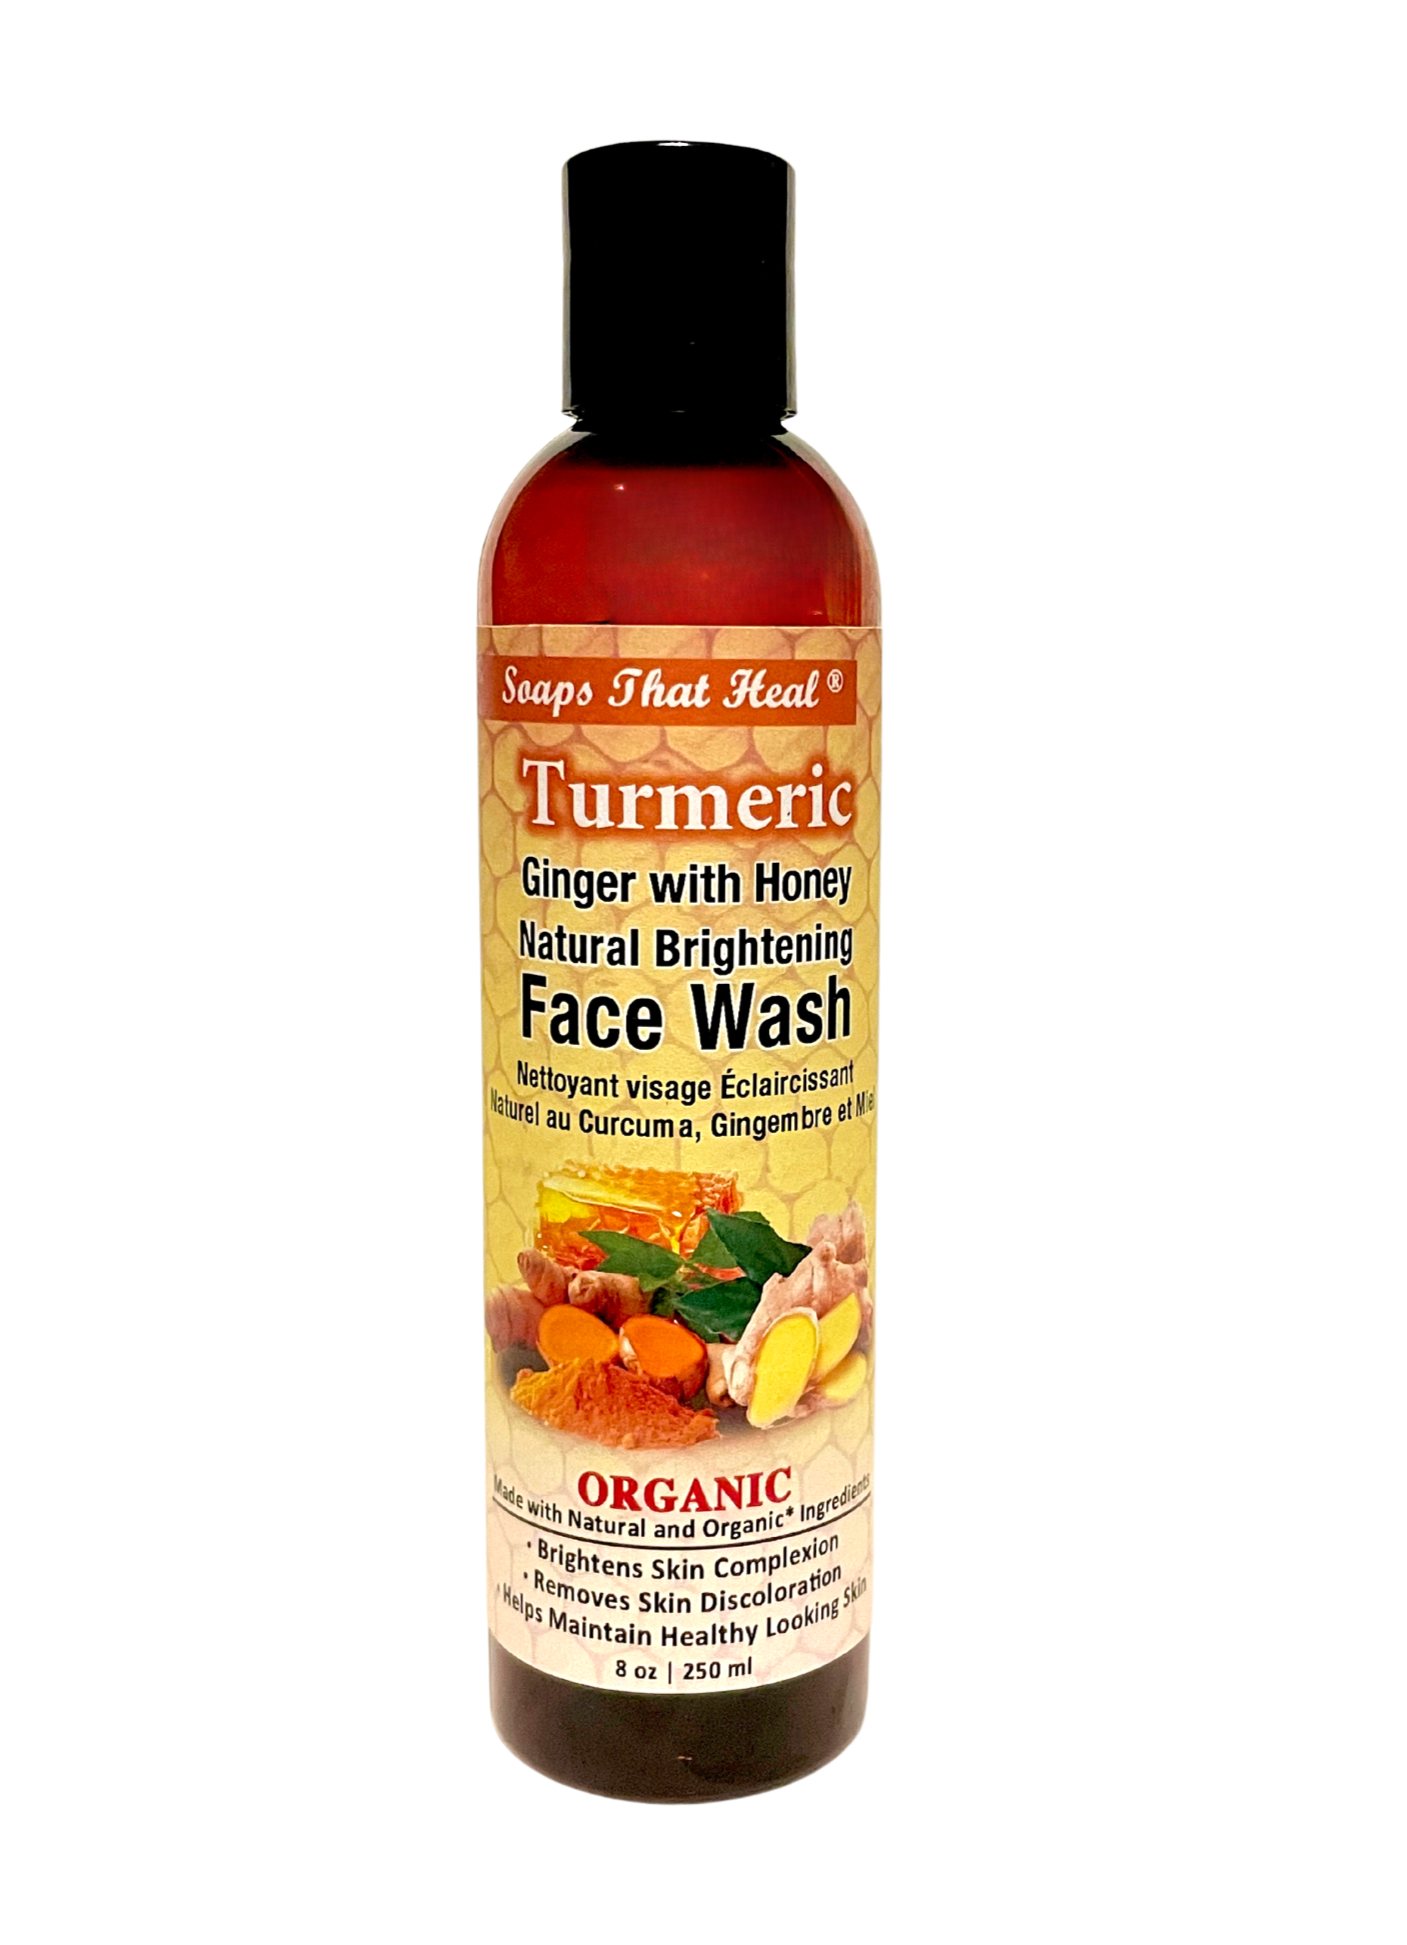 turmeric ginger honey face wash, soaps that heal turmeric soap, natural lightening, natural alternatives to whitening creams,fade creams,bleaching creams,Remove Dark Spots and Acne,aspen kay,Healthy Skin, Natural Products Skin Care, problem skin,Turmeric Soap,the best body soap,soaps that heal,healing soap, how to get rid of dark marks,dark spots,whitening soaps,lightening soaps,hyperpigmentation, best turmeric soap,oilblends,uncle benney's, brightening face wash, glowing skin, best face wash